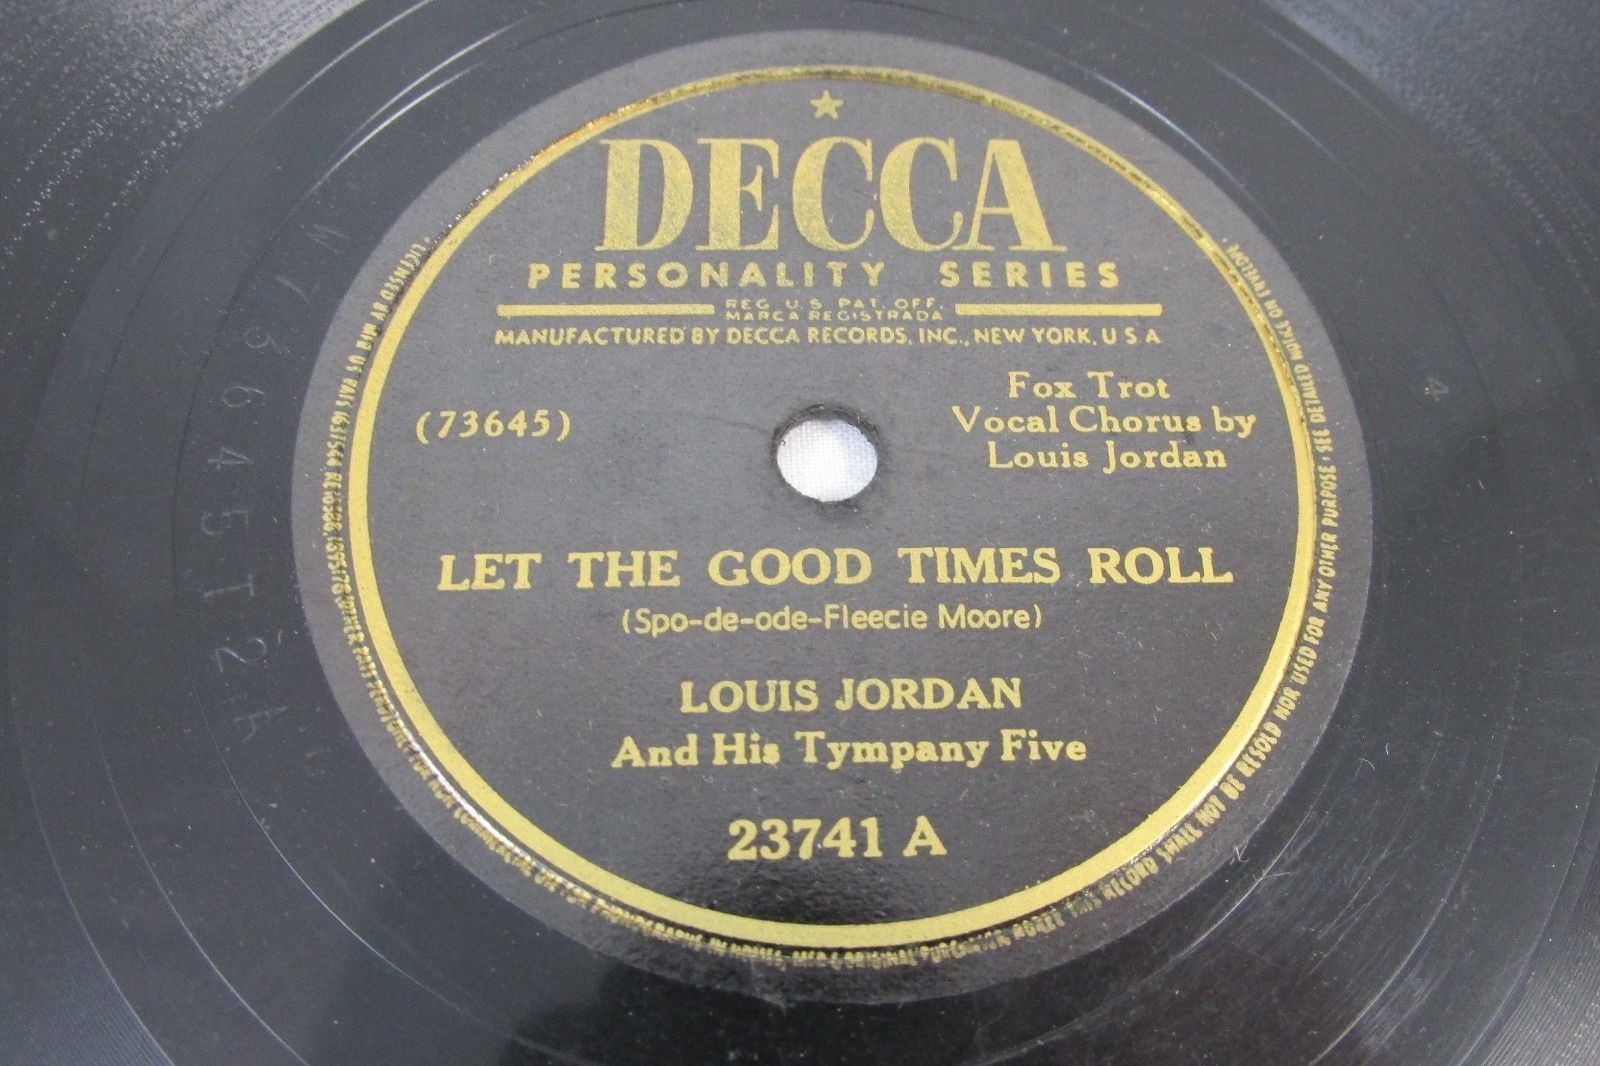 popsike.com - LOUIS JORDAN 78-rpm DECCA Record LET THE GOOD TIMES ROLL/AIN'T  NOBODY HERE 23741 - auction details